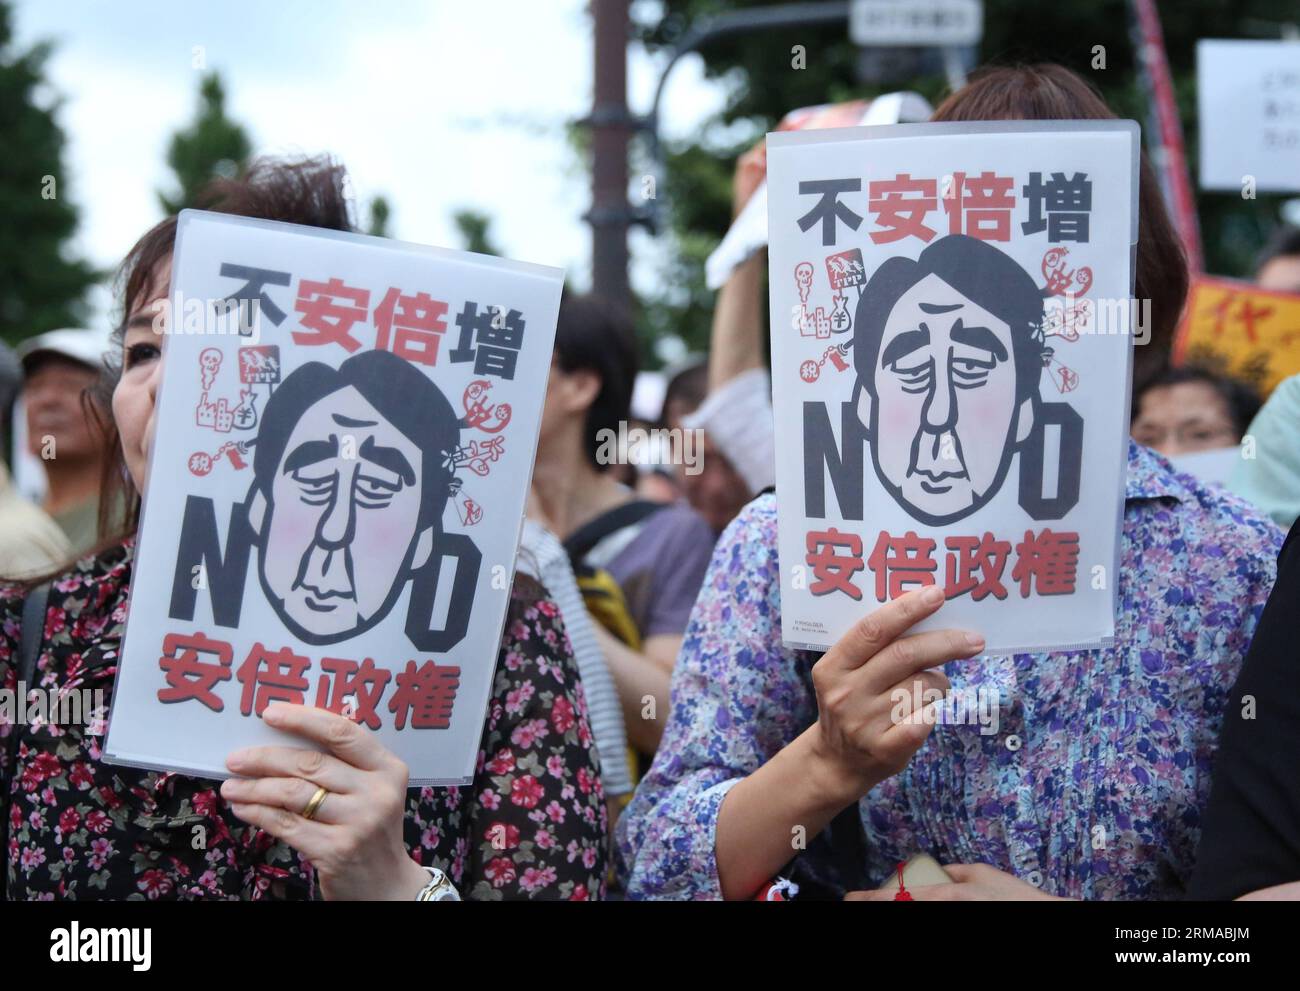 (140630) -- TOKYO, June 30, 2014 (Xinhua) -- People attend a rally to protest against the attempt to exercise the rights to collective self-defense in front of the Prime Minister s official residence in Tokyo, Japan, June 30, 2014. Thousands of Japanese people gathered here Monday, protesting against Japanese Prime Minister Shinzo Abe s attempt to allow Japan s Self-Defense Forces (SDF) to exercise the rights to collective self-defense. The Japanese government sought to get a green light from the Cabinet on July 1 for a resolution that will allow Japan to exercise collective self-defense right Stock Photo